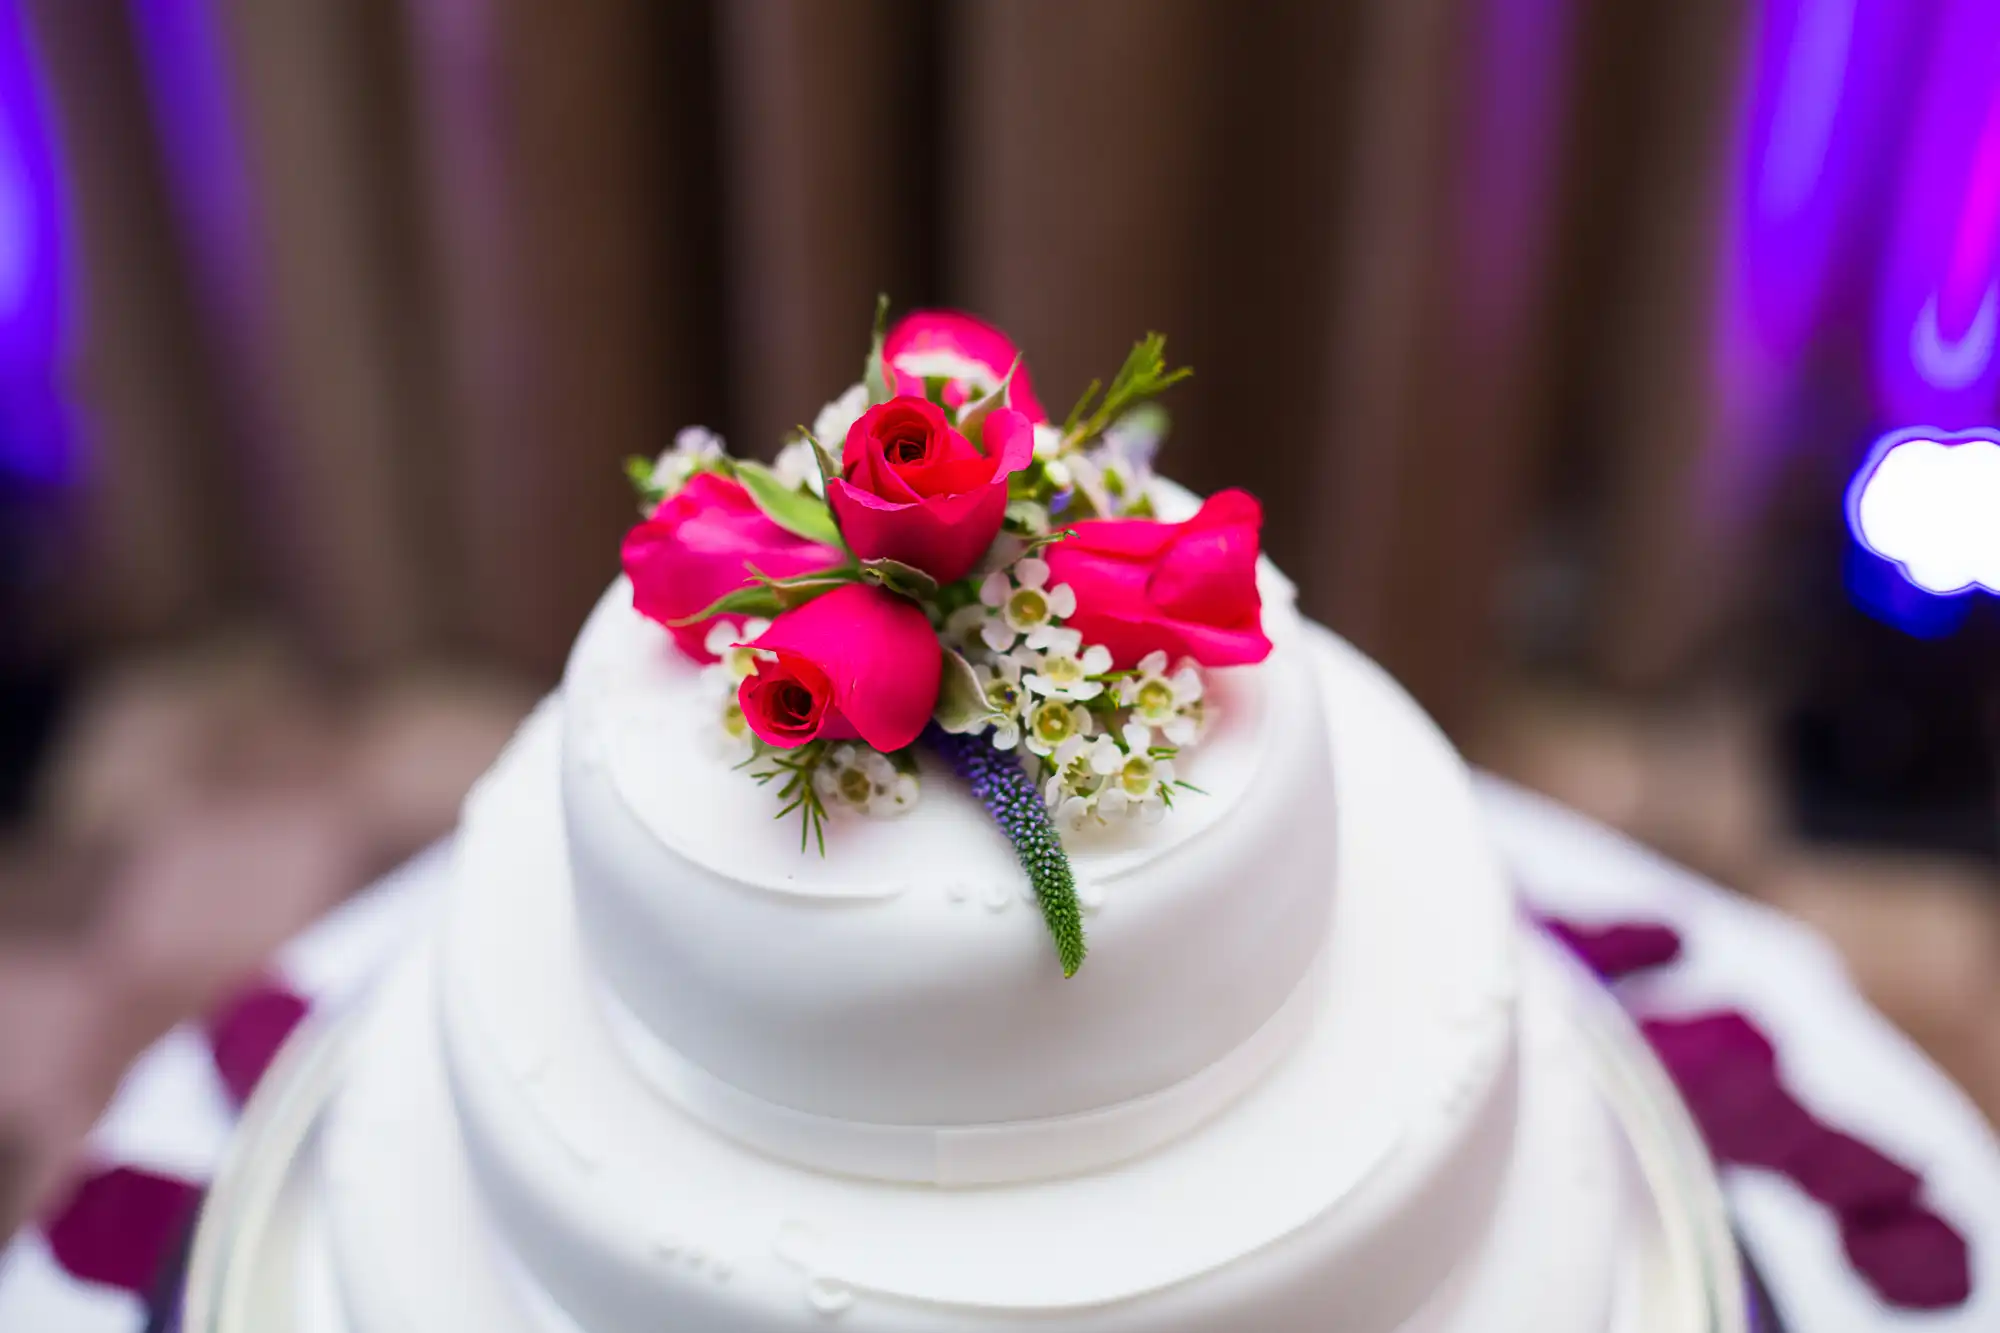 White wedding cake topped with vibrant pink roses and small white flowers, set against a blurred background with purple lighting.